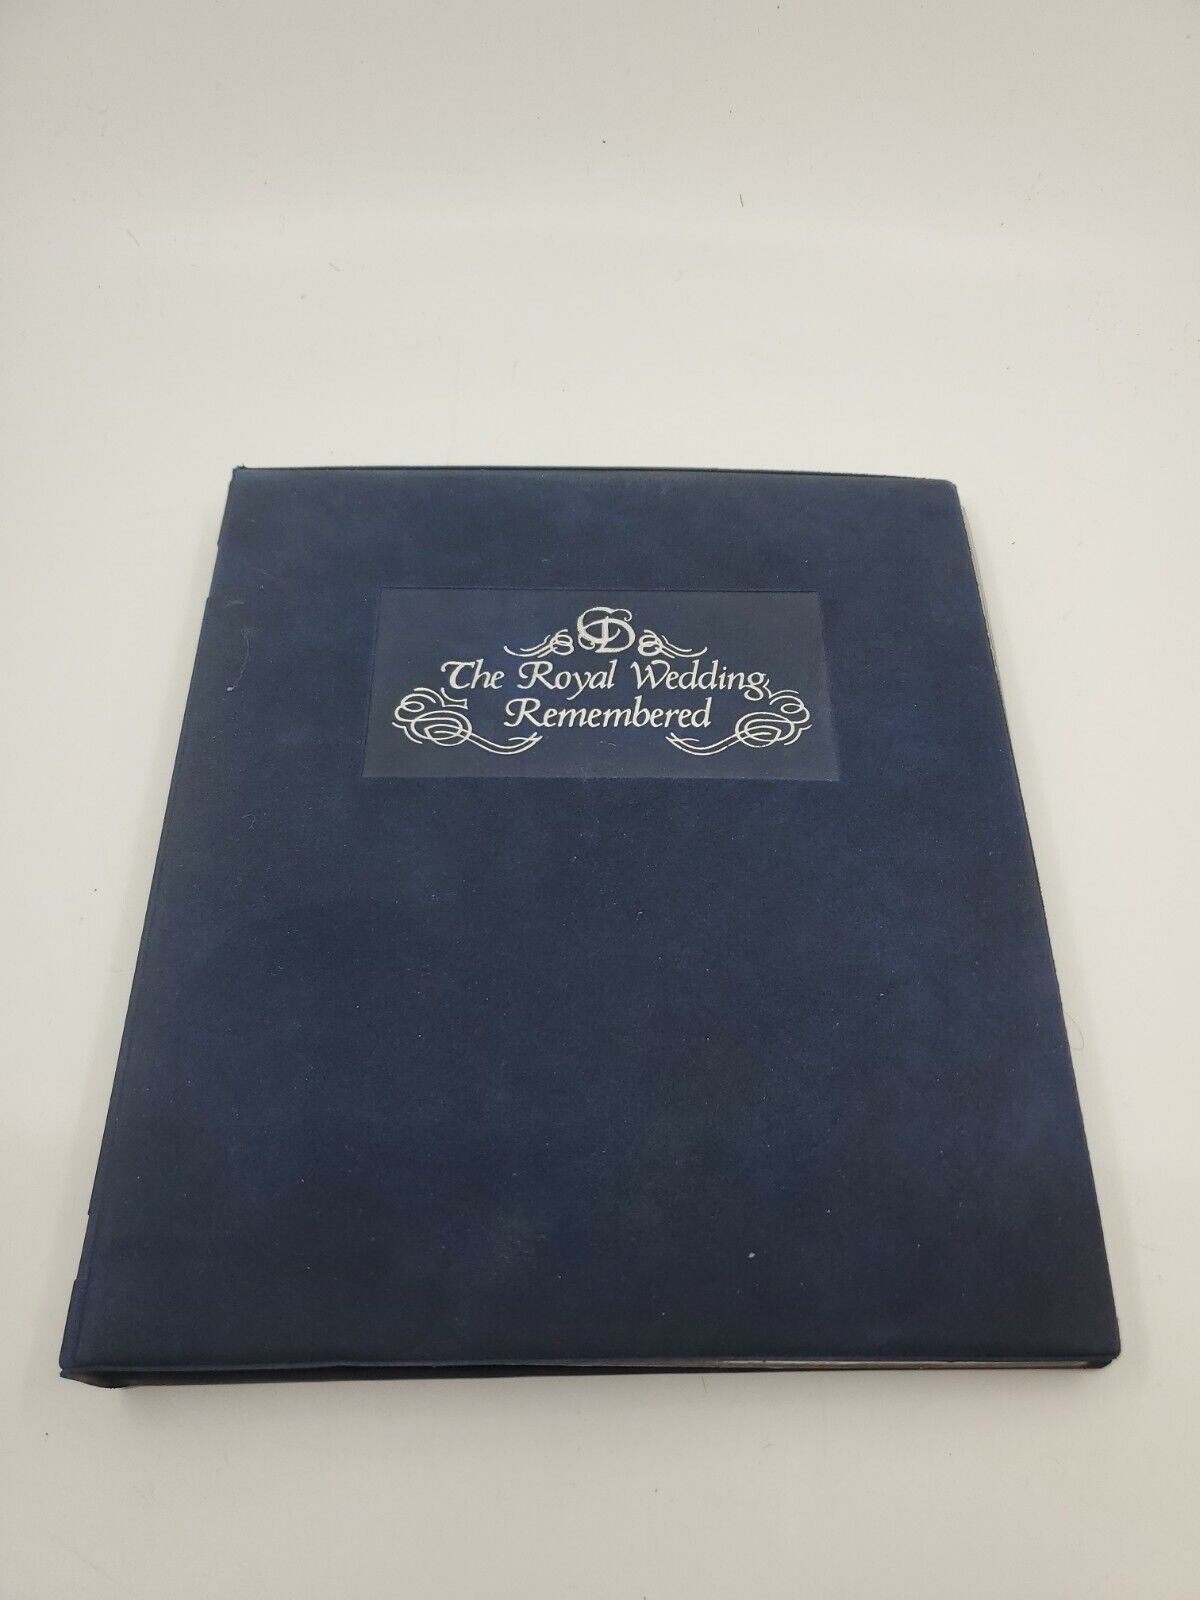 The Royal Wedding Remembered Album with random letters and stamps not related